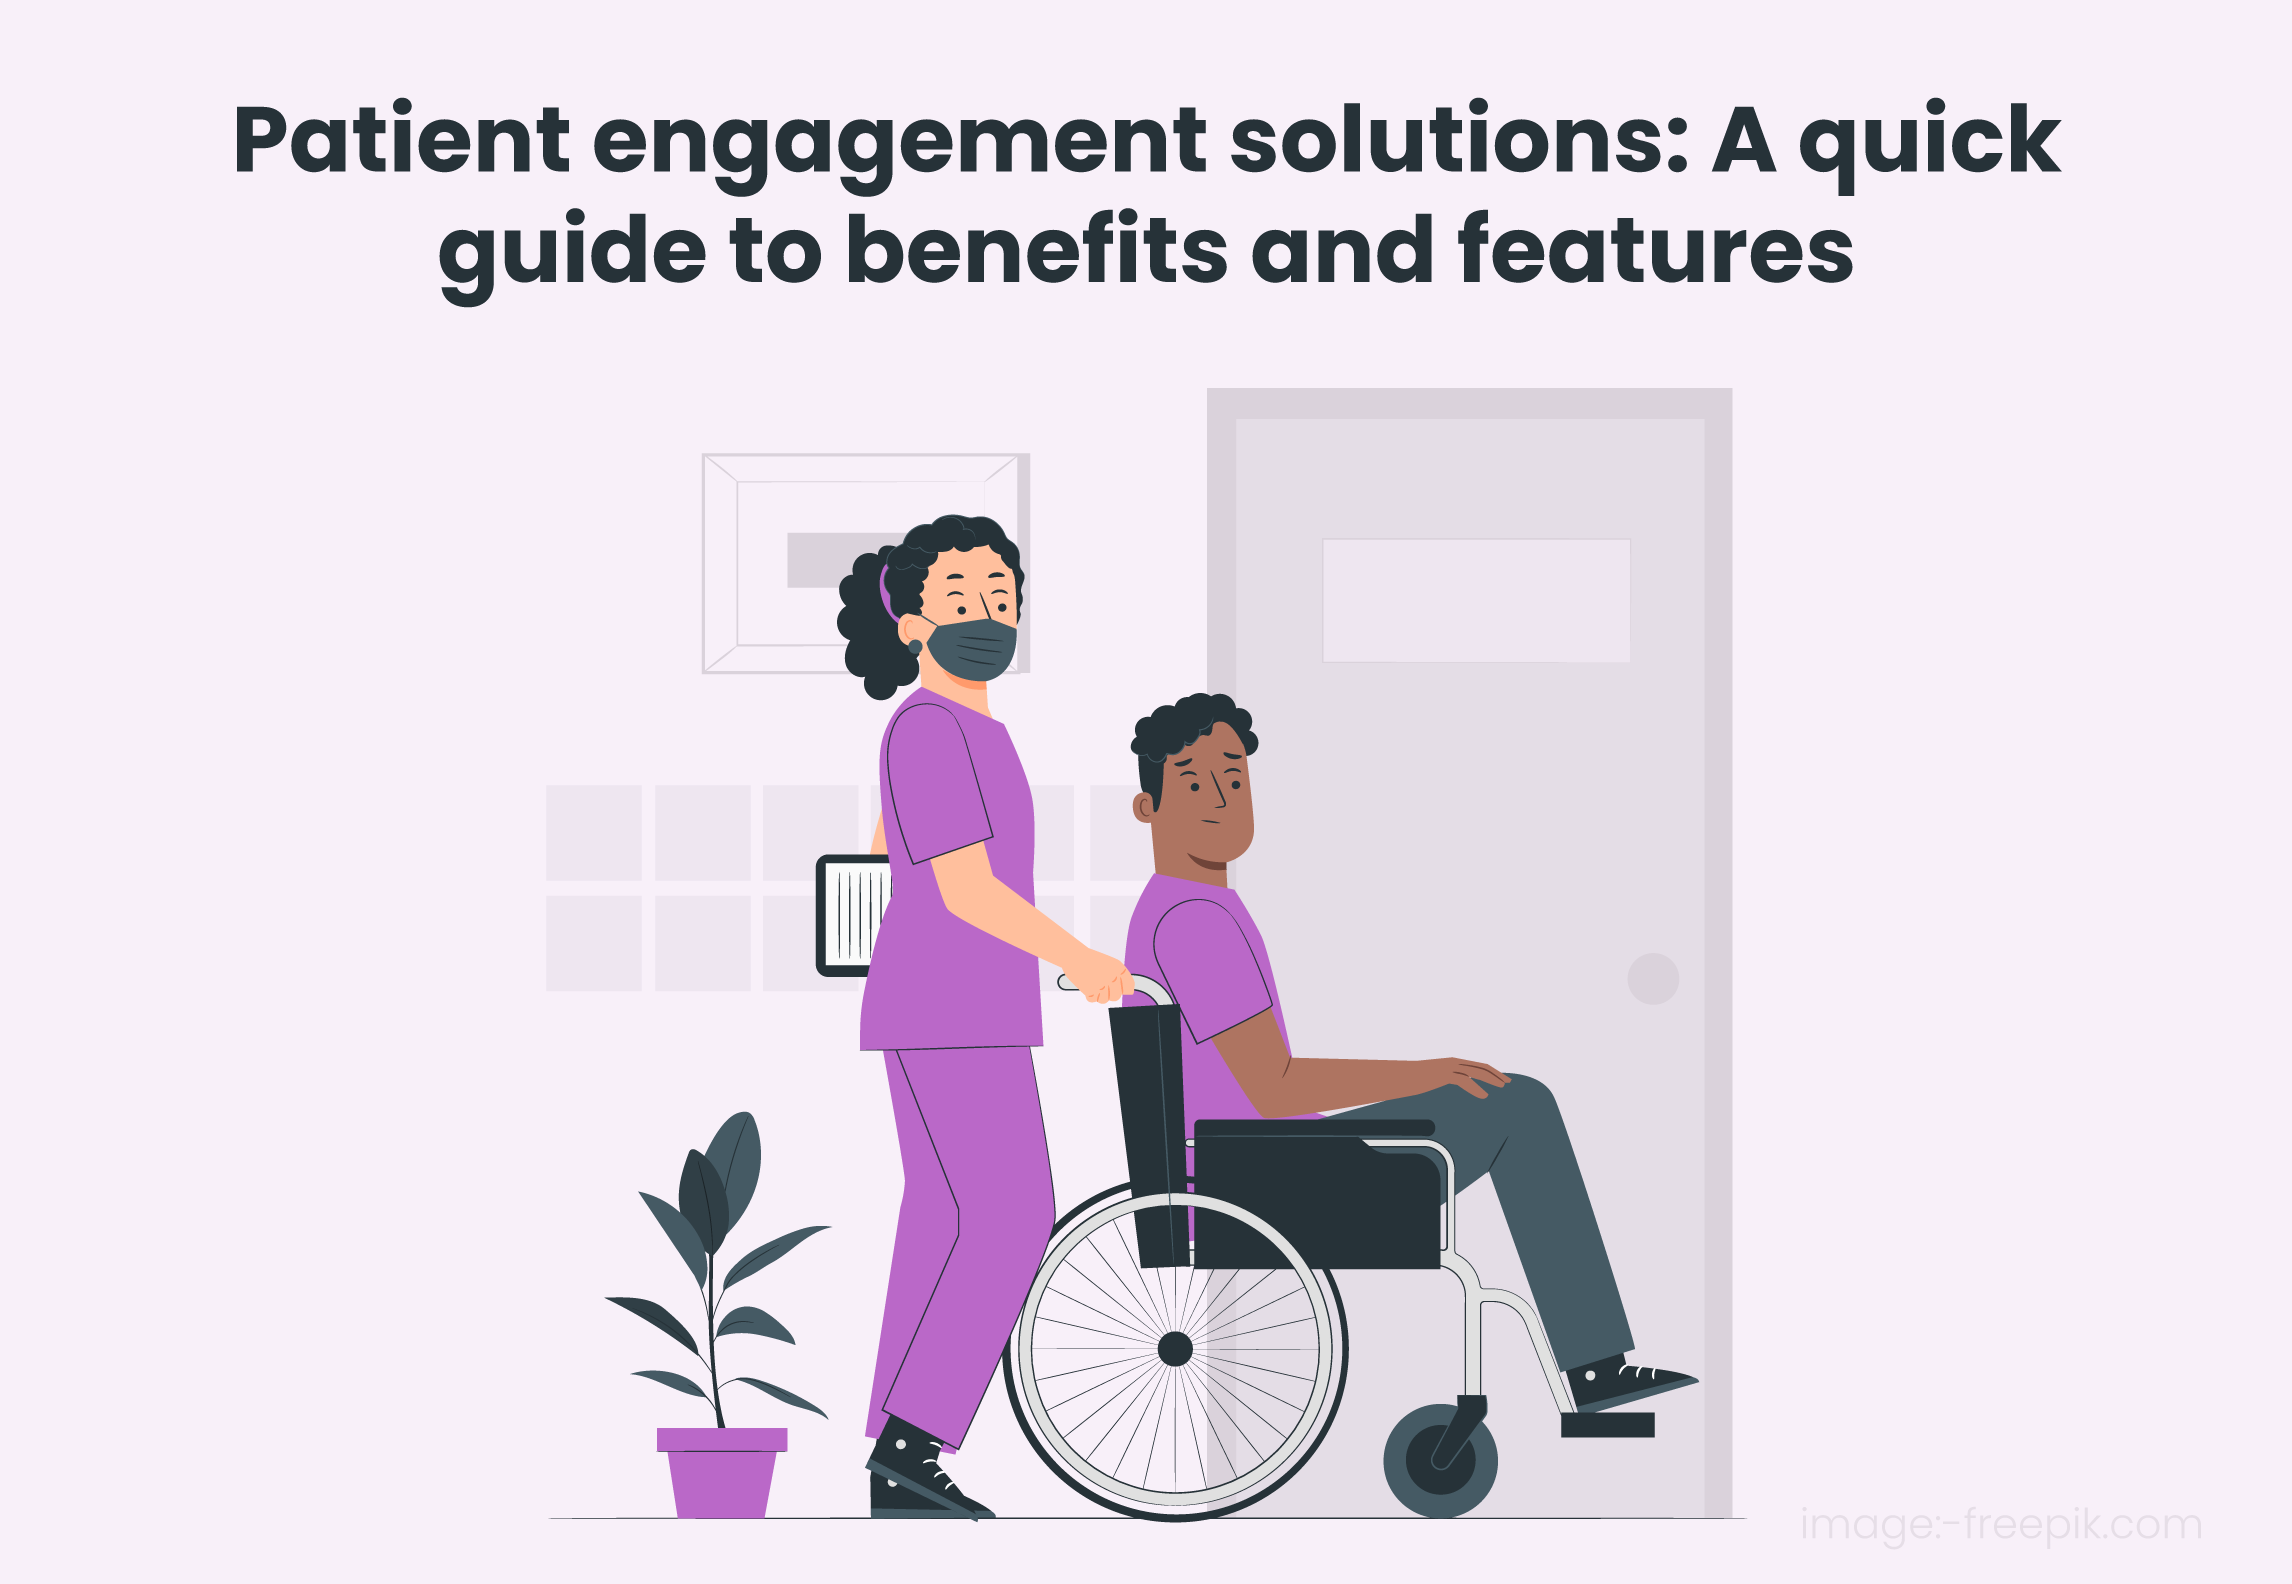 Patient engagement solutions: A quick guide to benefits and features